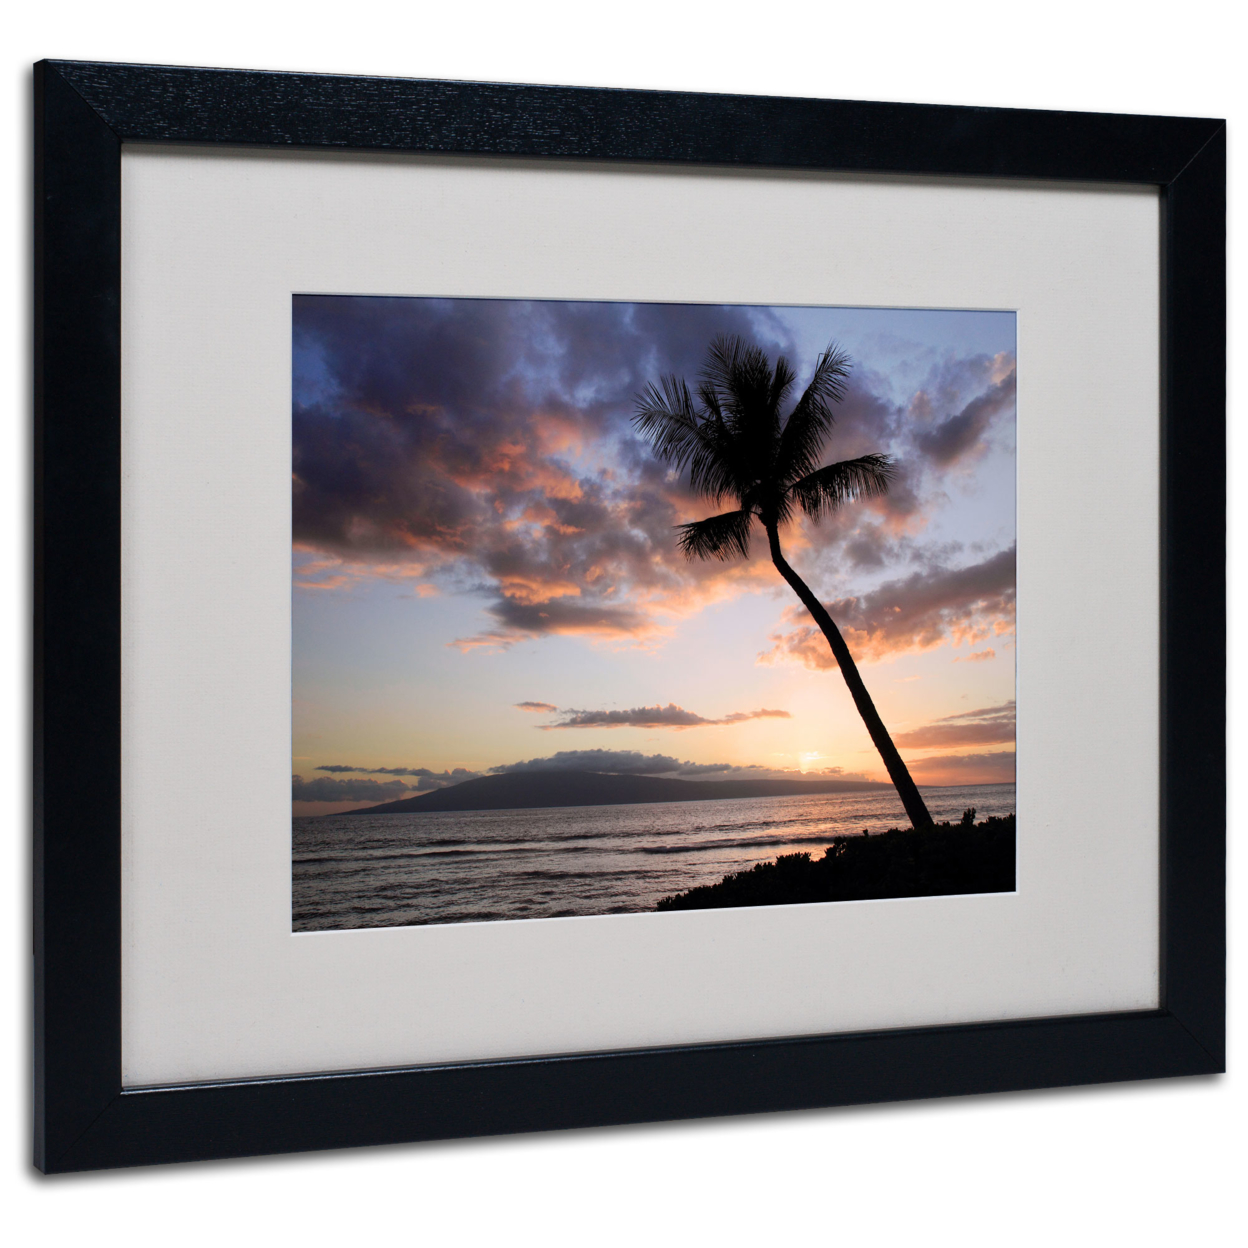 Pierre Leclerc 'Palm Tree Maui' Black Wooden Framed Art 18 X 22 Inches